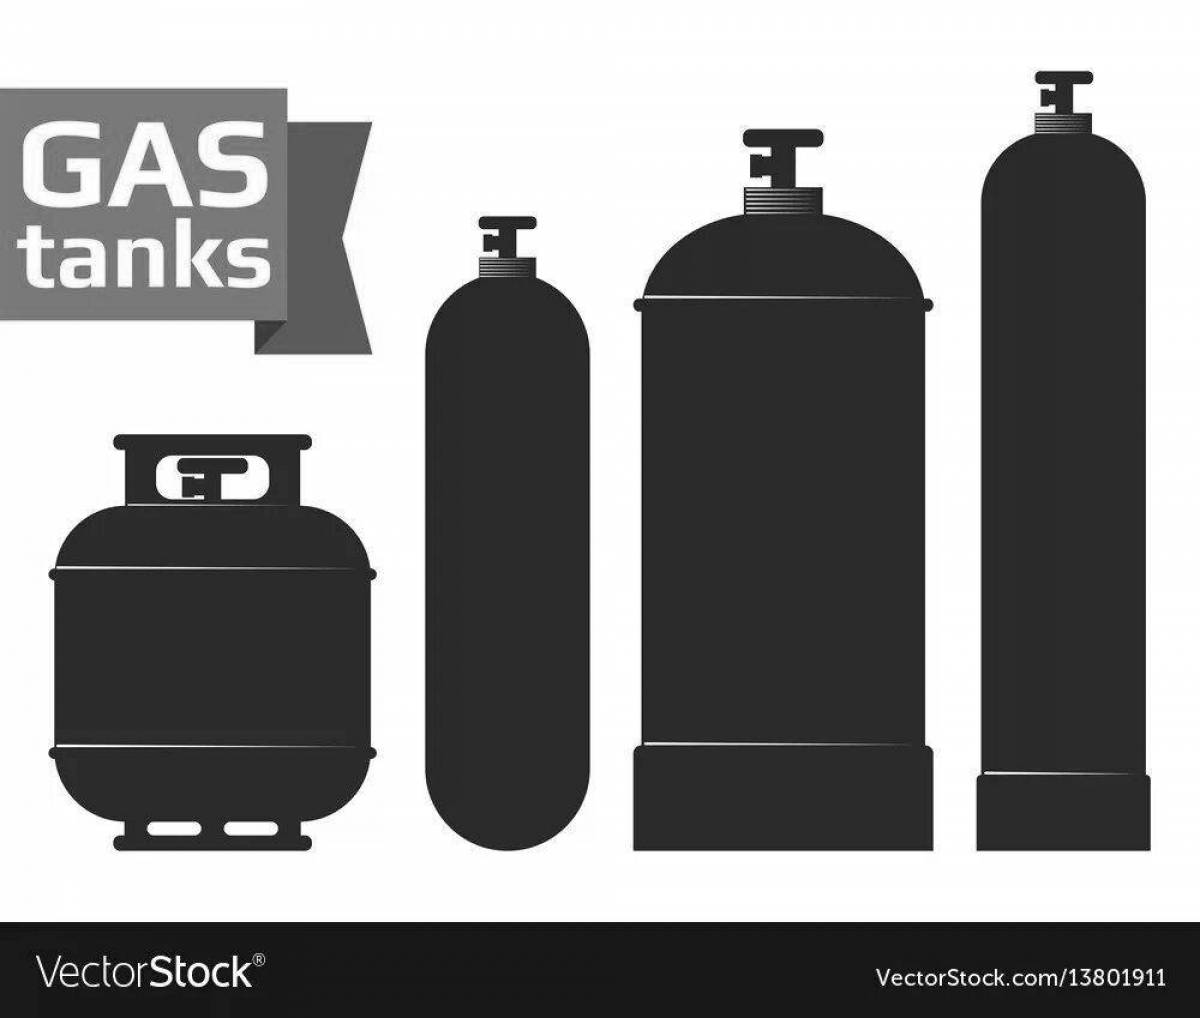 Gorgeous gas cylinders coloring book